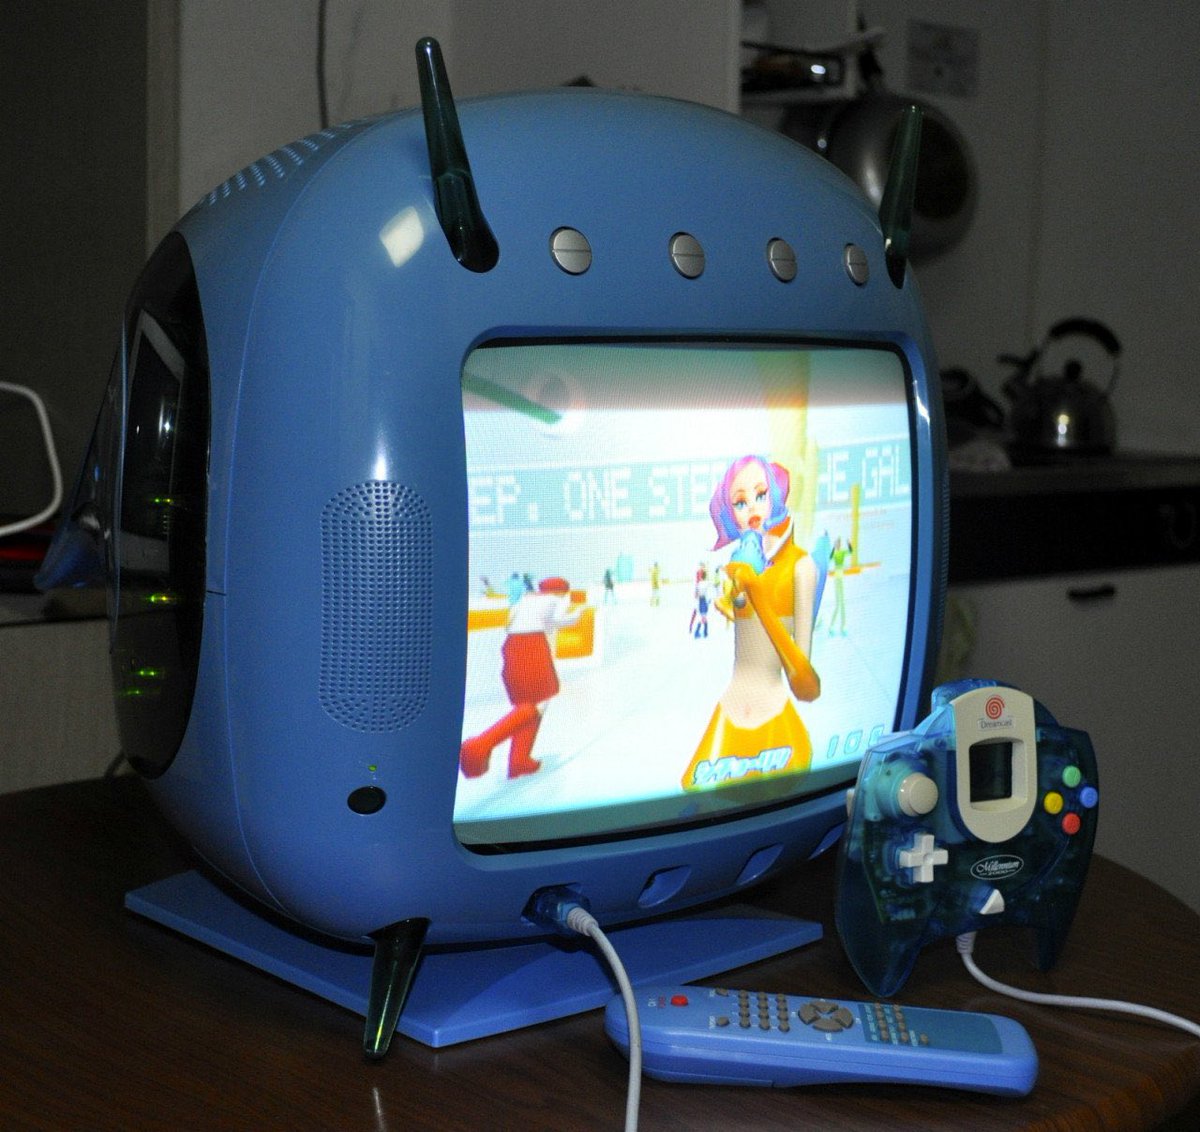 14' TV from 2000 sold only in Japan and included a built-in Sega Dreamcast console. Only 500-1000 were made.